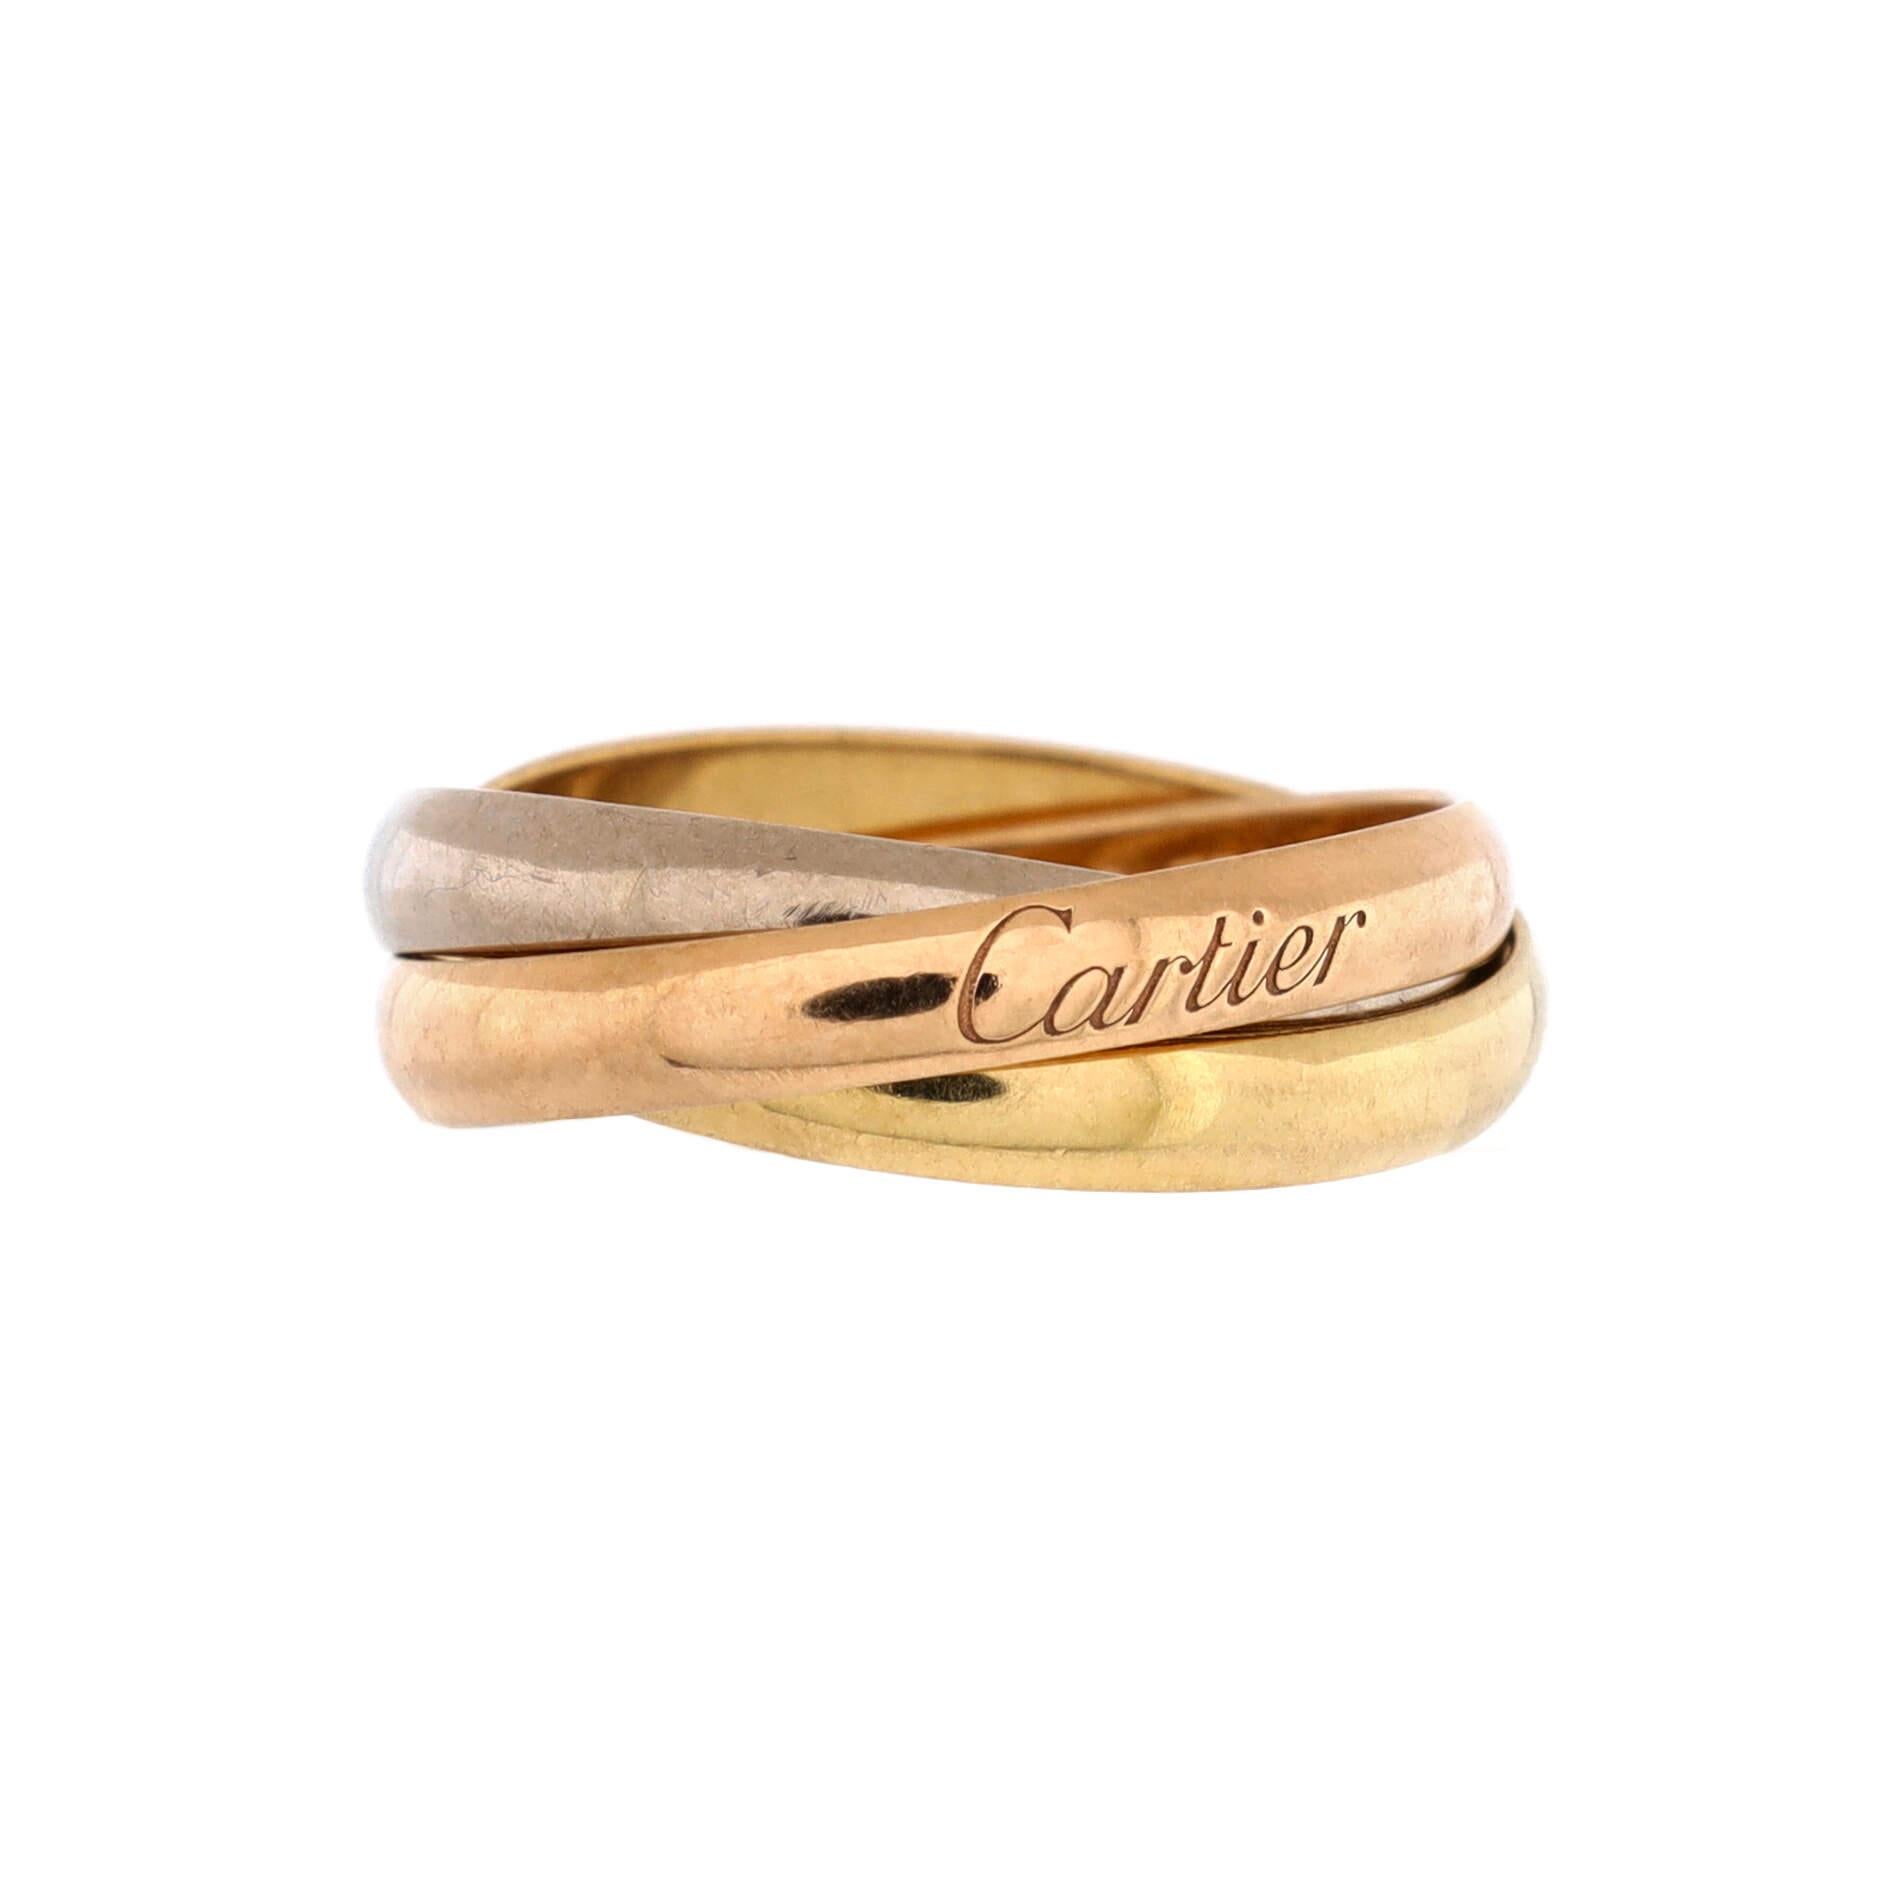 Condition: Very good. Moderate wear throughout
Accessories: No Accessories
Measurements: Size: 7.5 - 56, Width: 2.8 mm
Designer: Cartier
Model: Trinity Ring 18K Tricolor Gold Small
Exterior Color: Tricolor Gold
Item Number: 208676/2